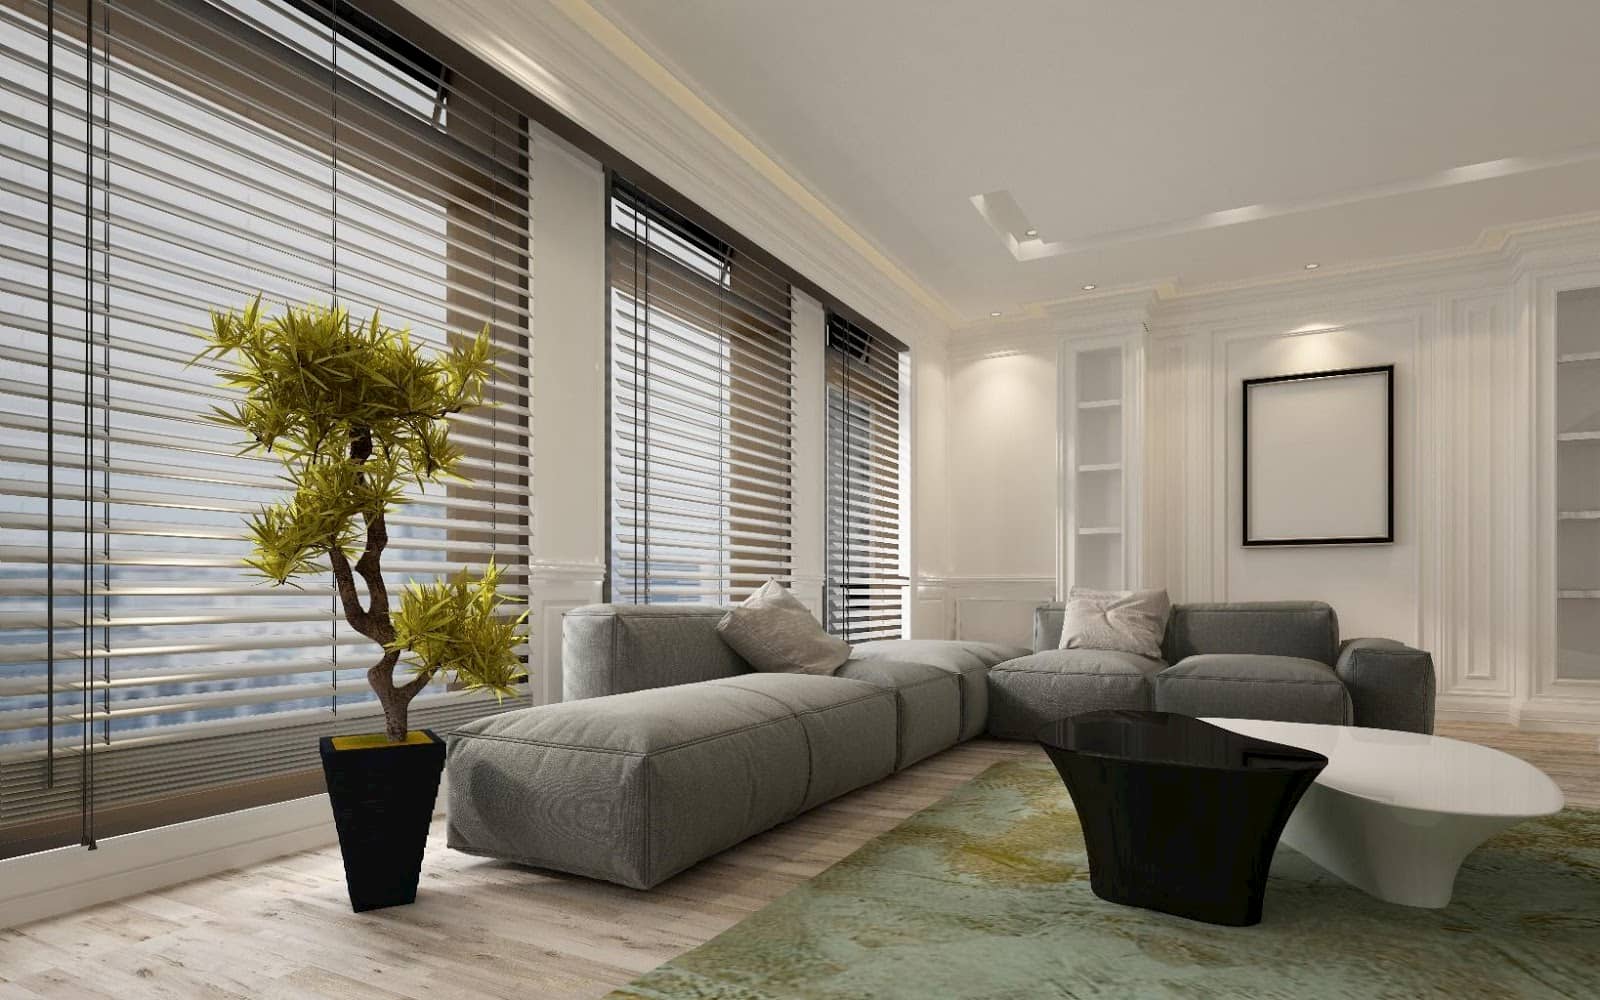 Transform your living space with blinds and shutters – Ideas for every room